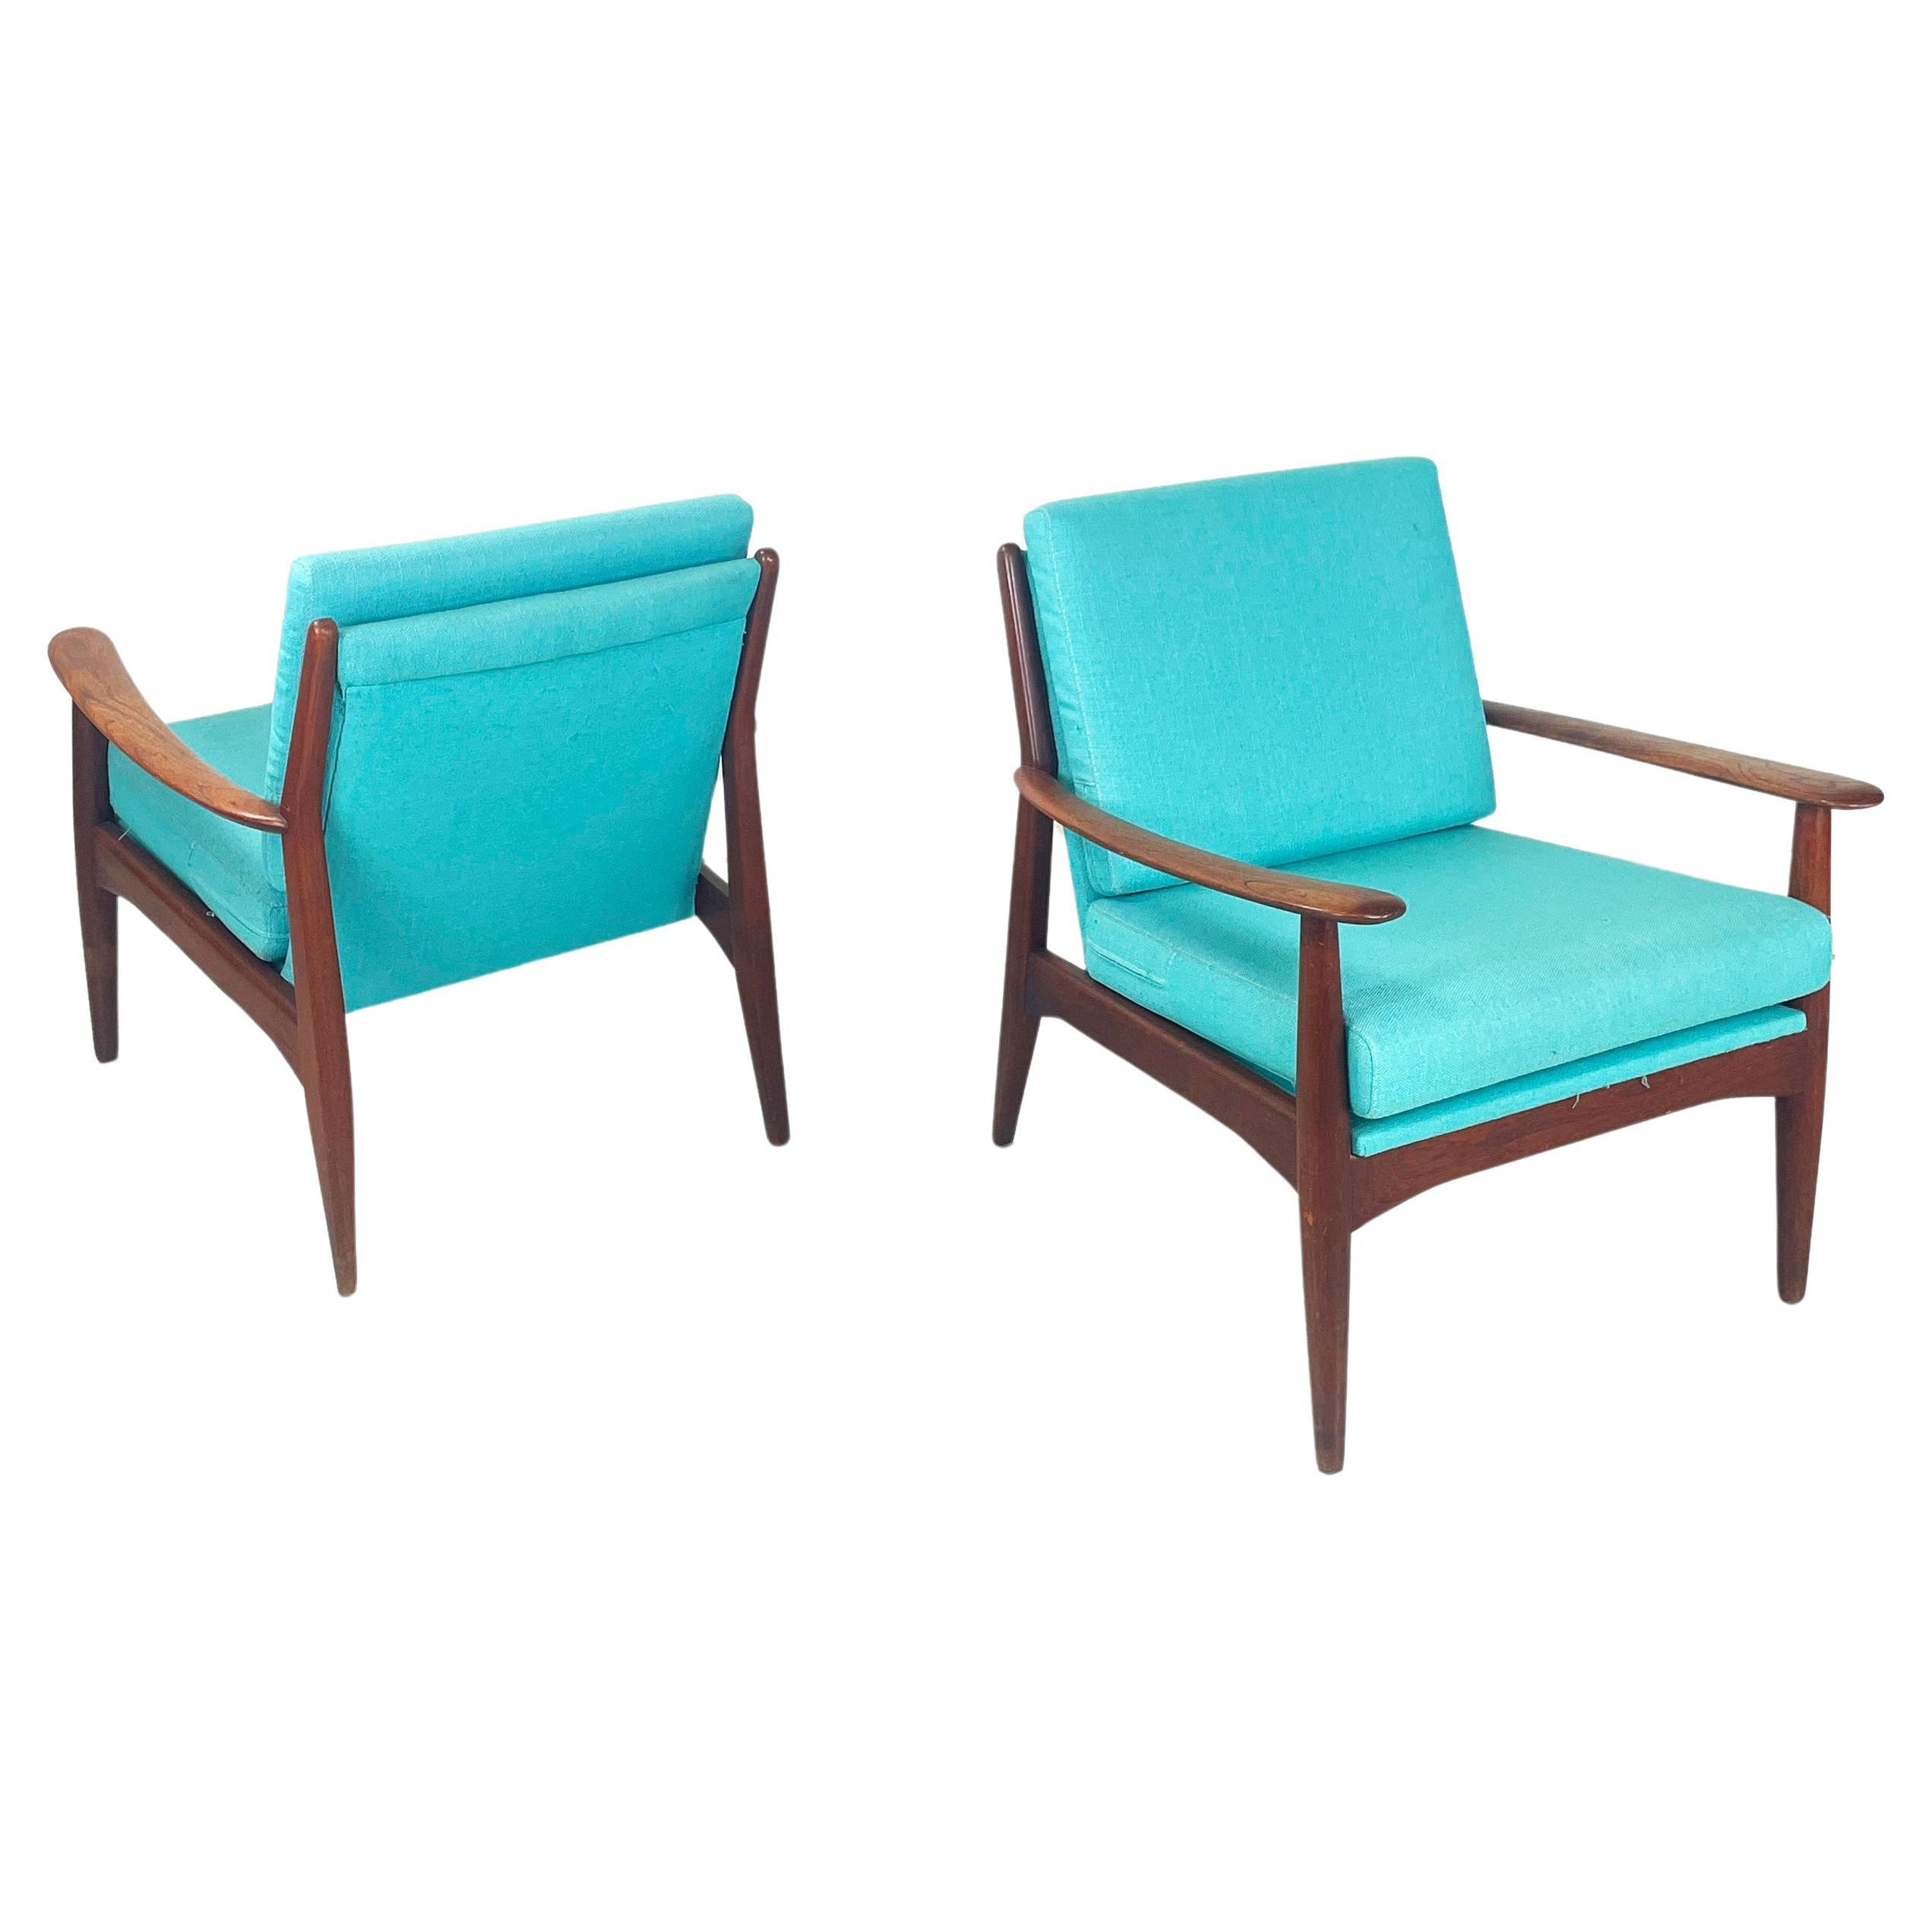 European mid-century modern Armchairs in light blue fabric and wood, 1960s